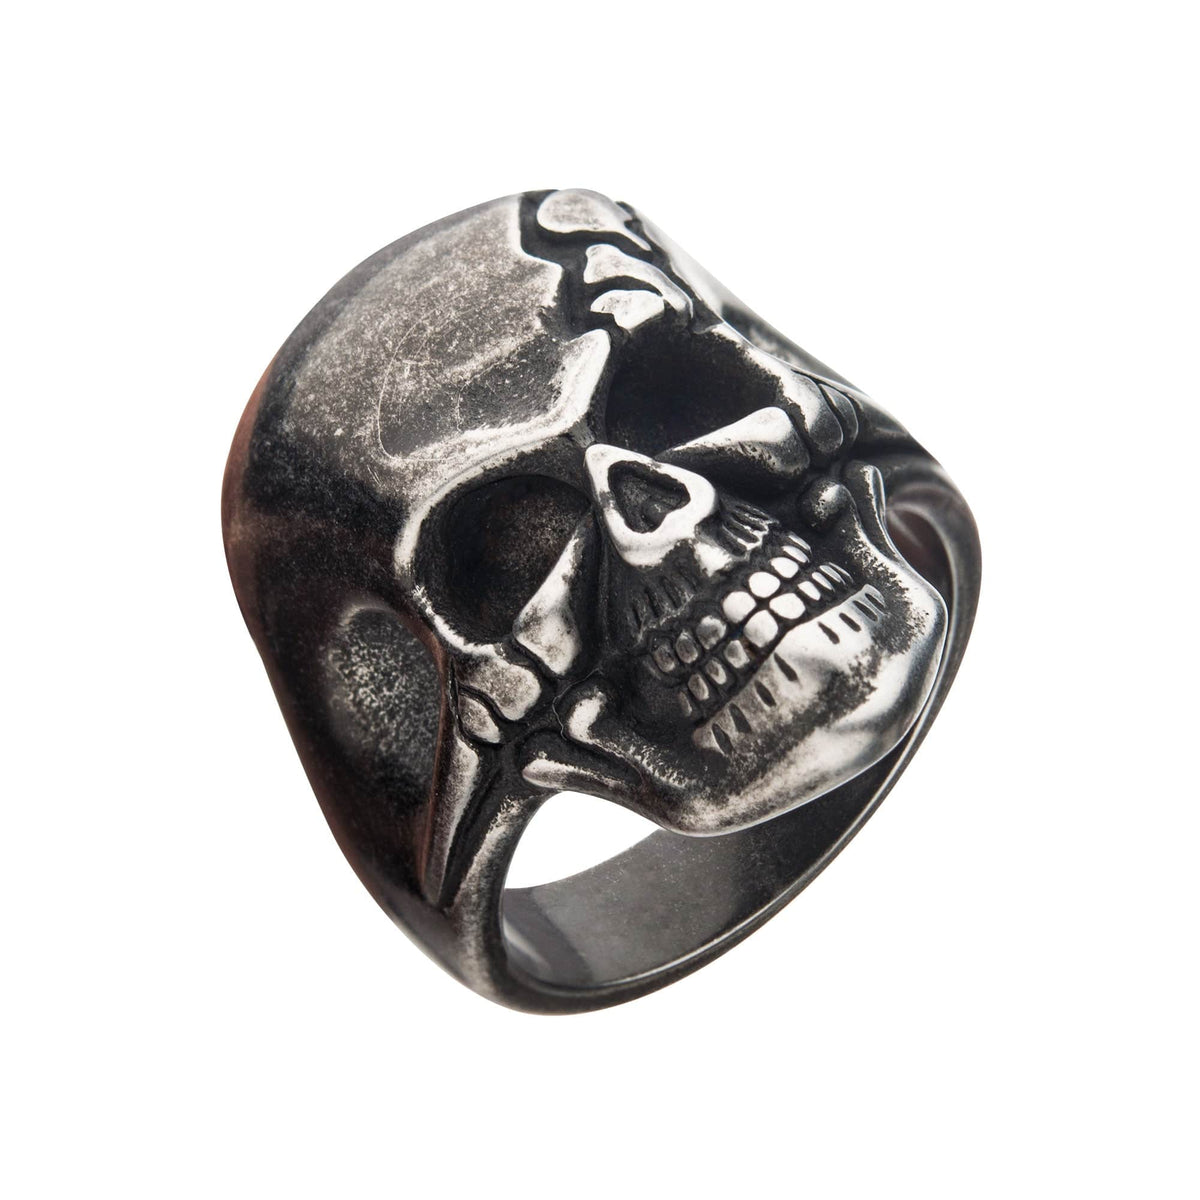 INOX JEWELRY Rings Silver Tone Stainless Steel Antique Finish Gunmetal Cracked Skull Ring